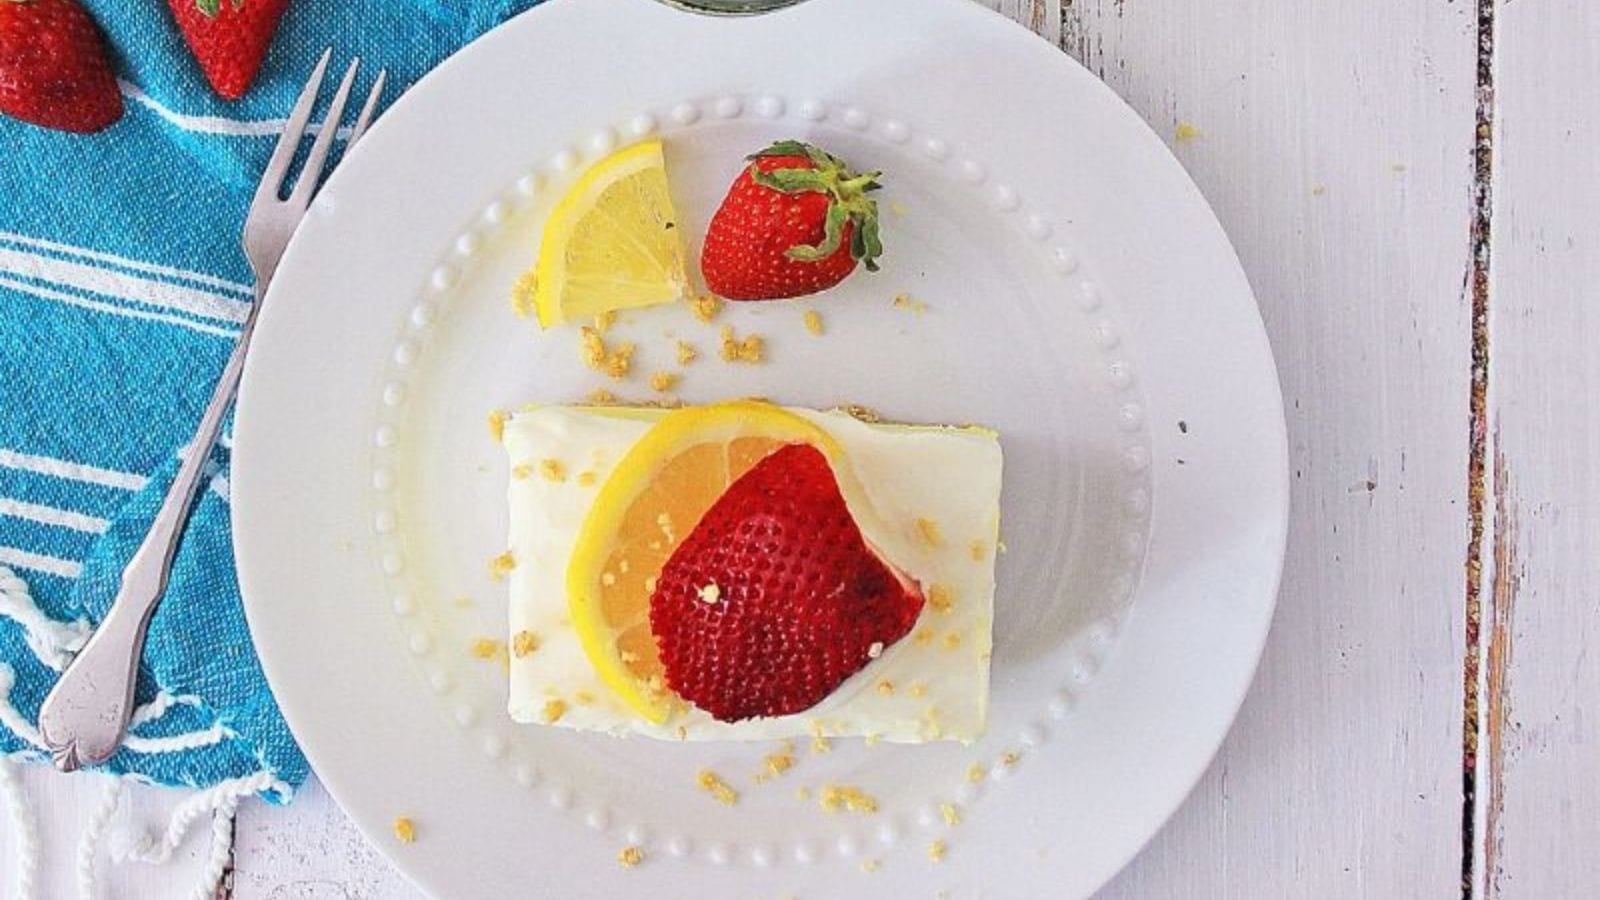 A no-bake cake with layers of lemon, strawberry, and pudding.